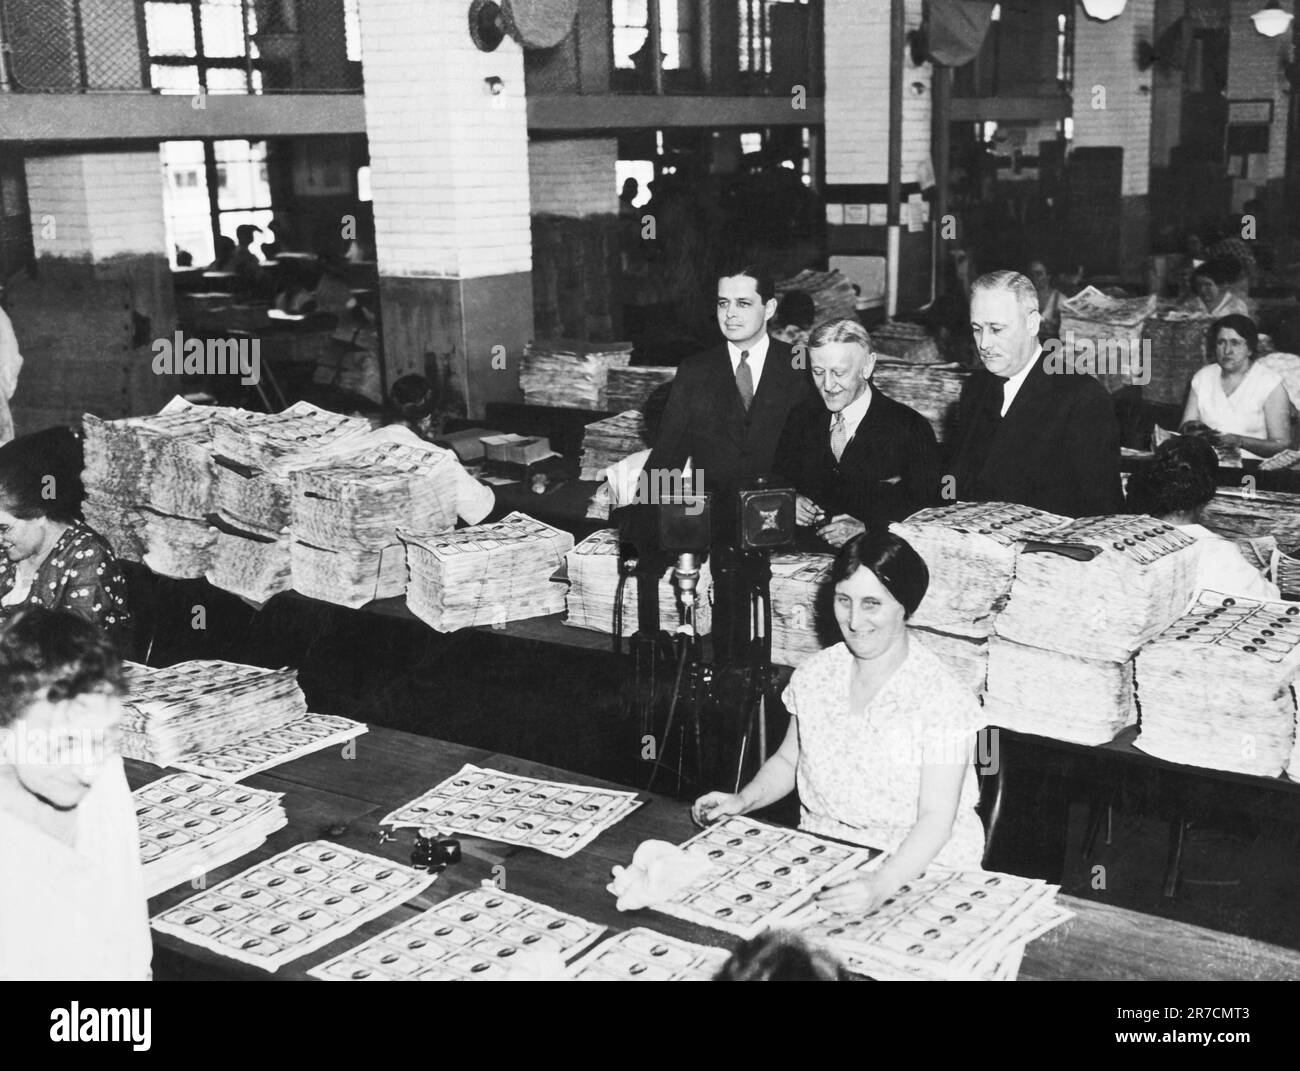 Washington, D.C.:  c. 1929 Workers at the Bureau of Engraving with piles of sheets of dollar bills. Stock Photo